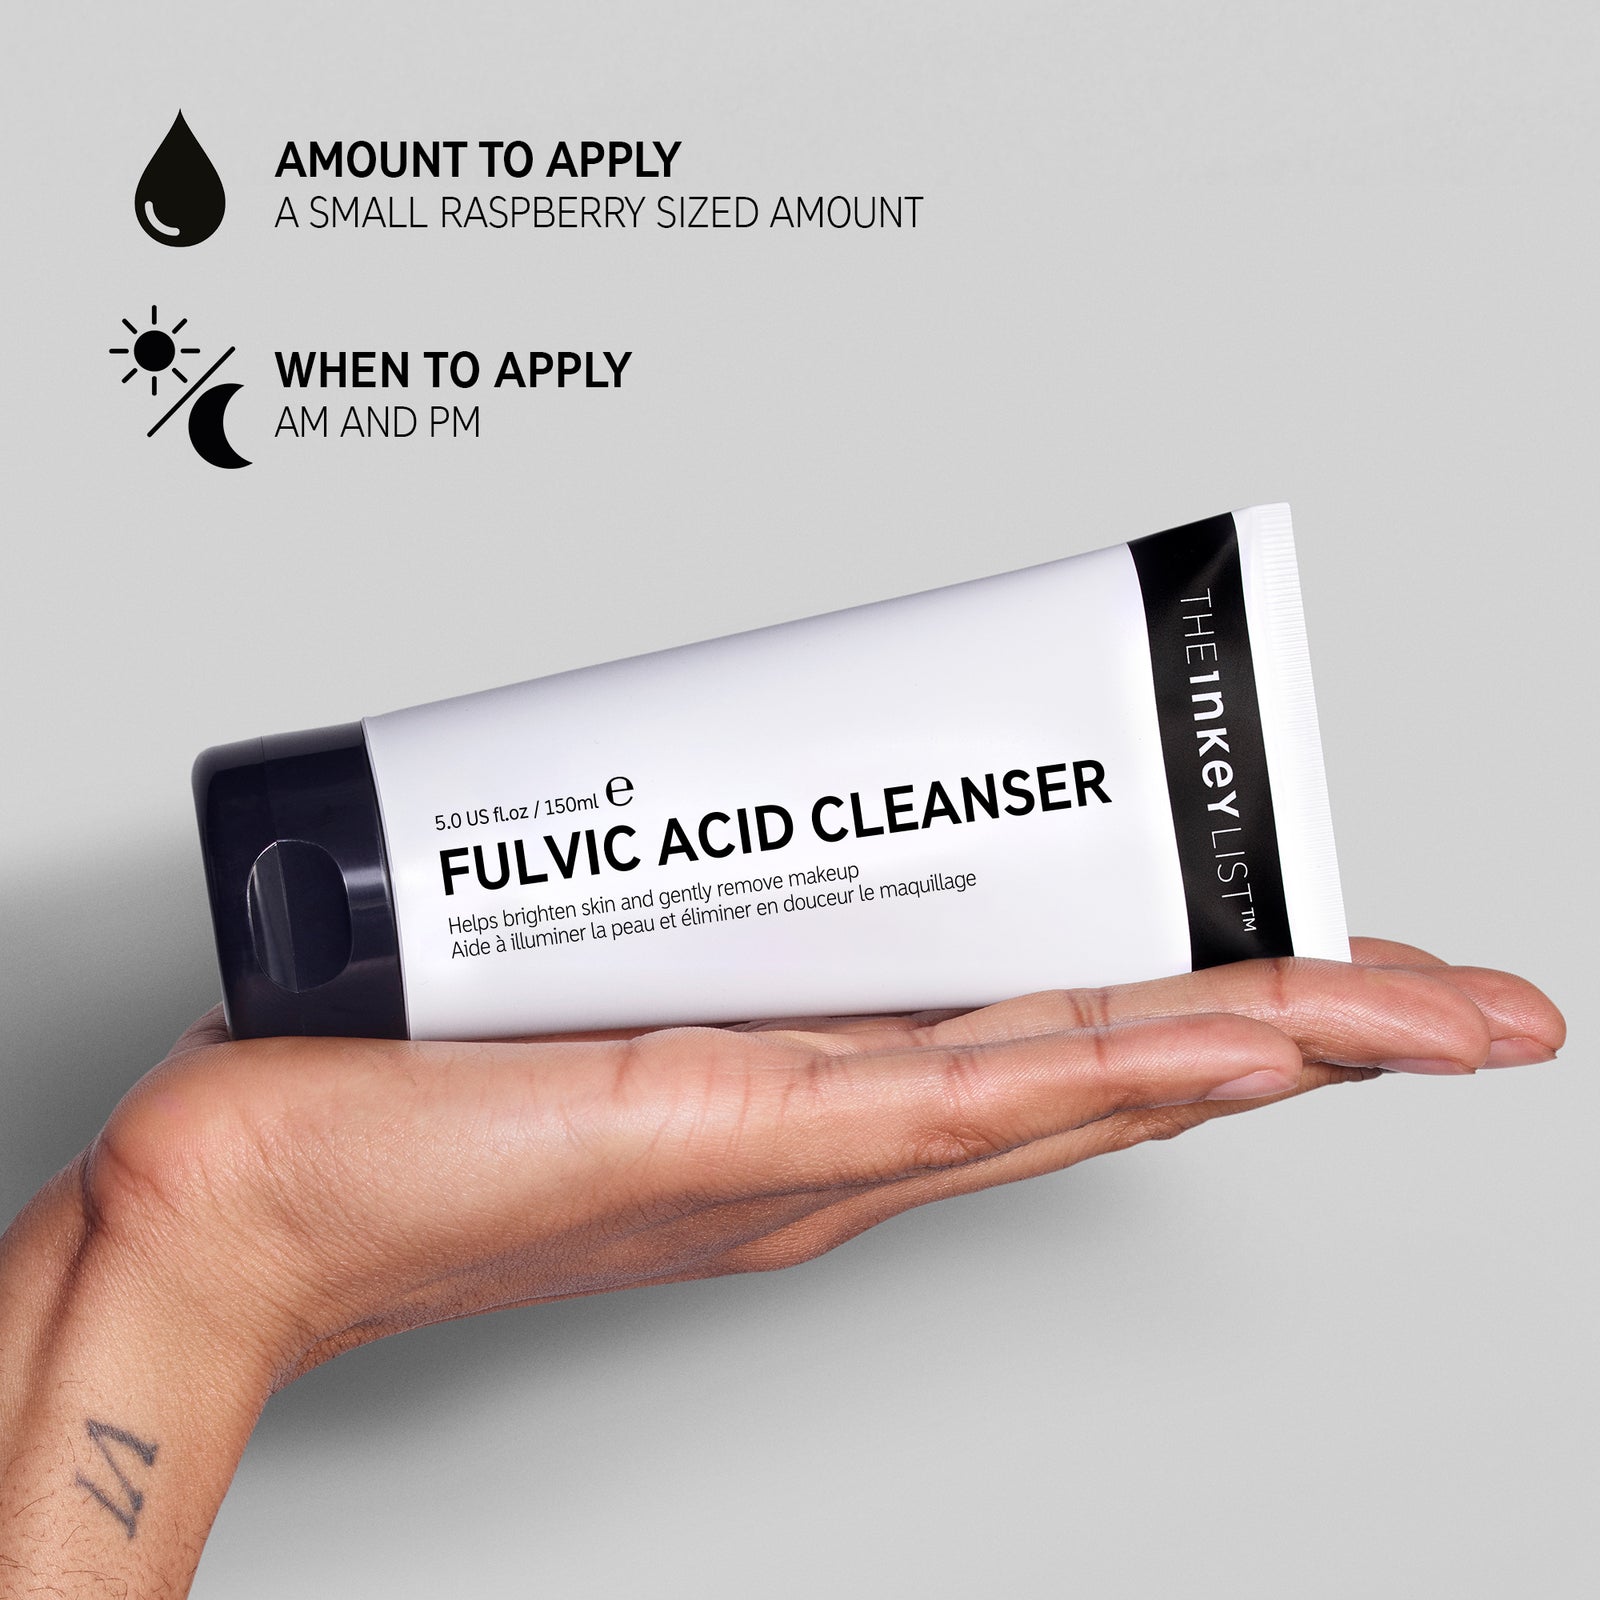 Instructions on how to use Fulvic Acid Cleanser